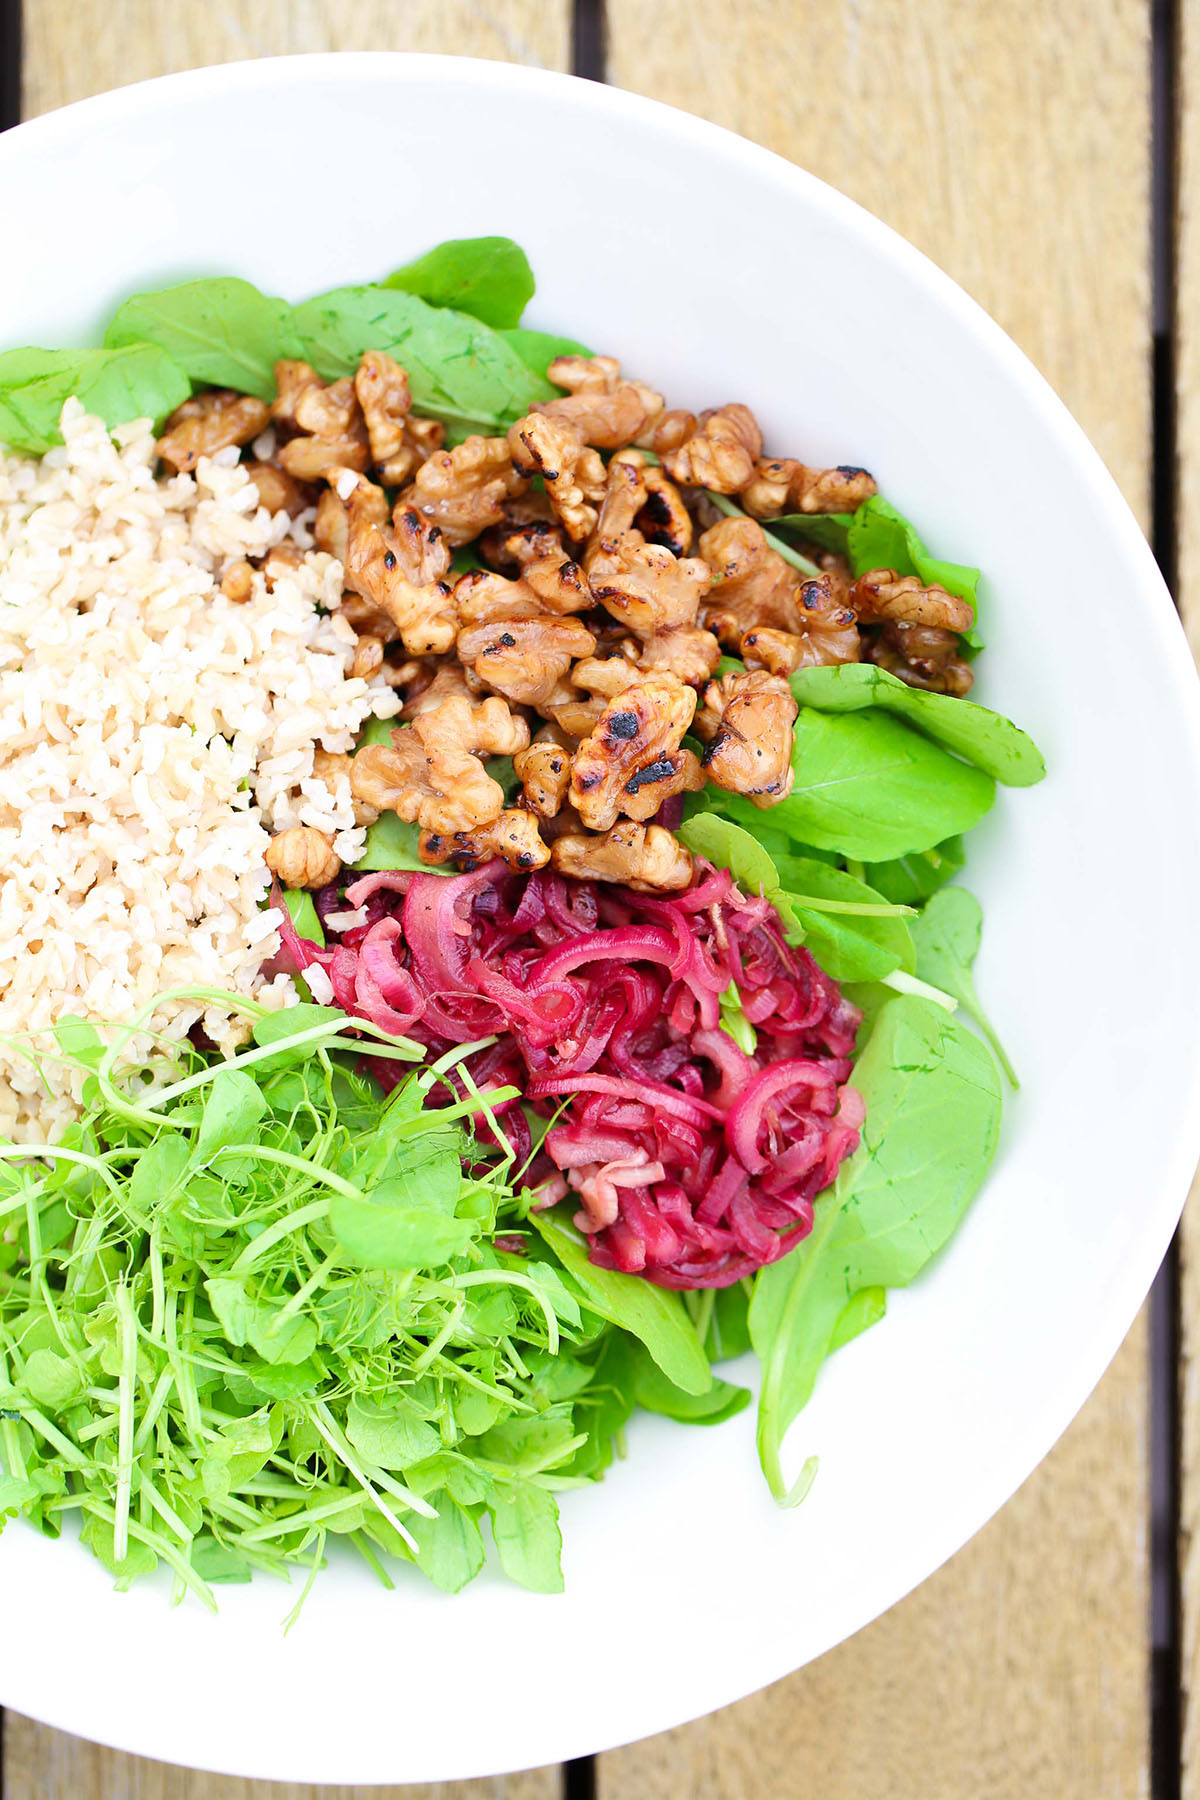 Delicious seasonal feijoa recipe, a savoury way to use feijoas in a salad, with caramelised walnuts, brown rice, caramelised red onions, grounding brown rice, and a sweet balsamic dressing.